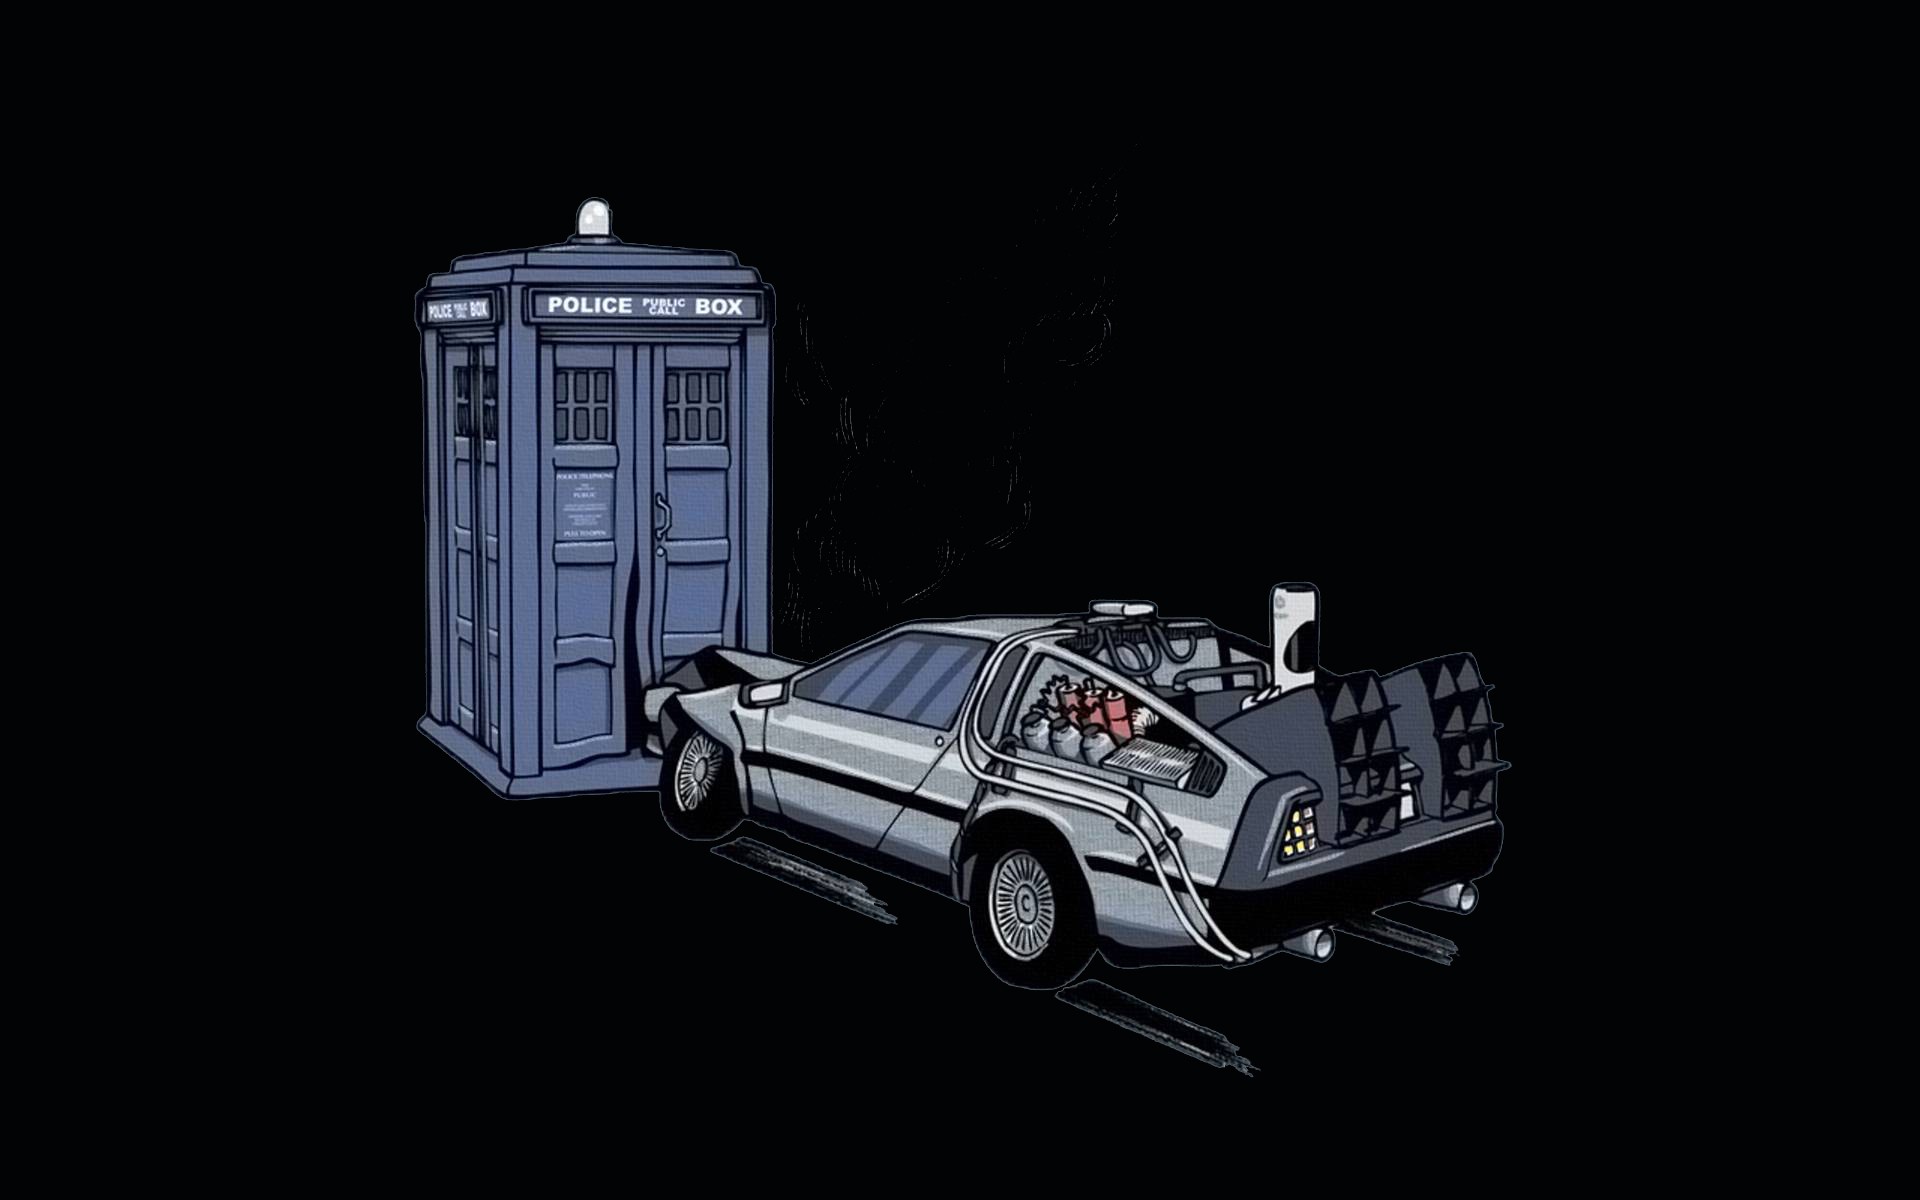 General 1920x1200 crossover Back to the Future Doctor Who humor Time Machine time travel movies science fiction artwork car vehicle silver cars TV series DeLorean